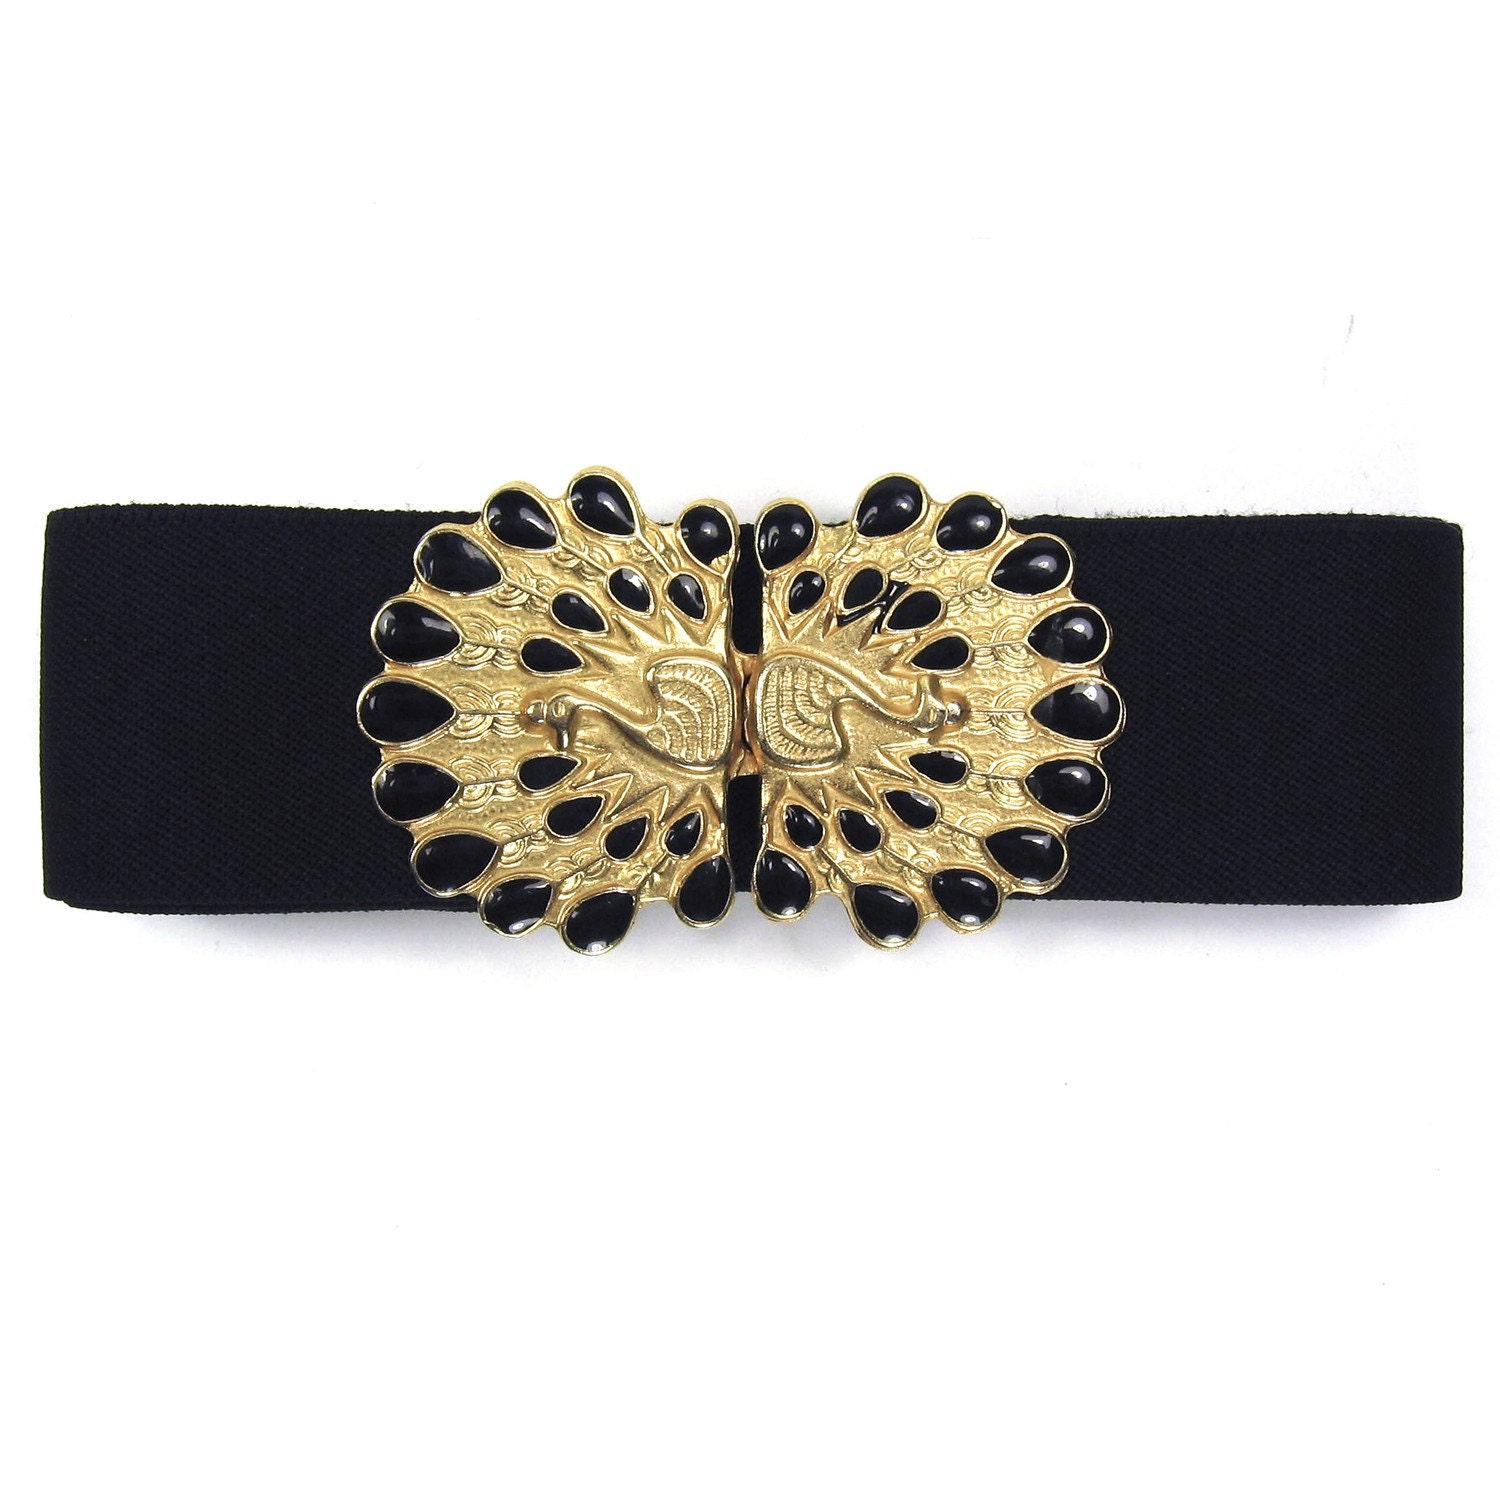 Vintage Black and Gold Peacock Buckle Duo on Elastic Belt - Adjustable to XS, S, M, L, XL